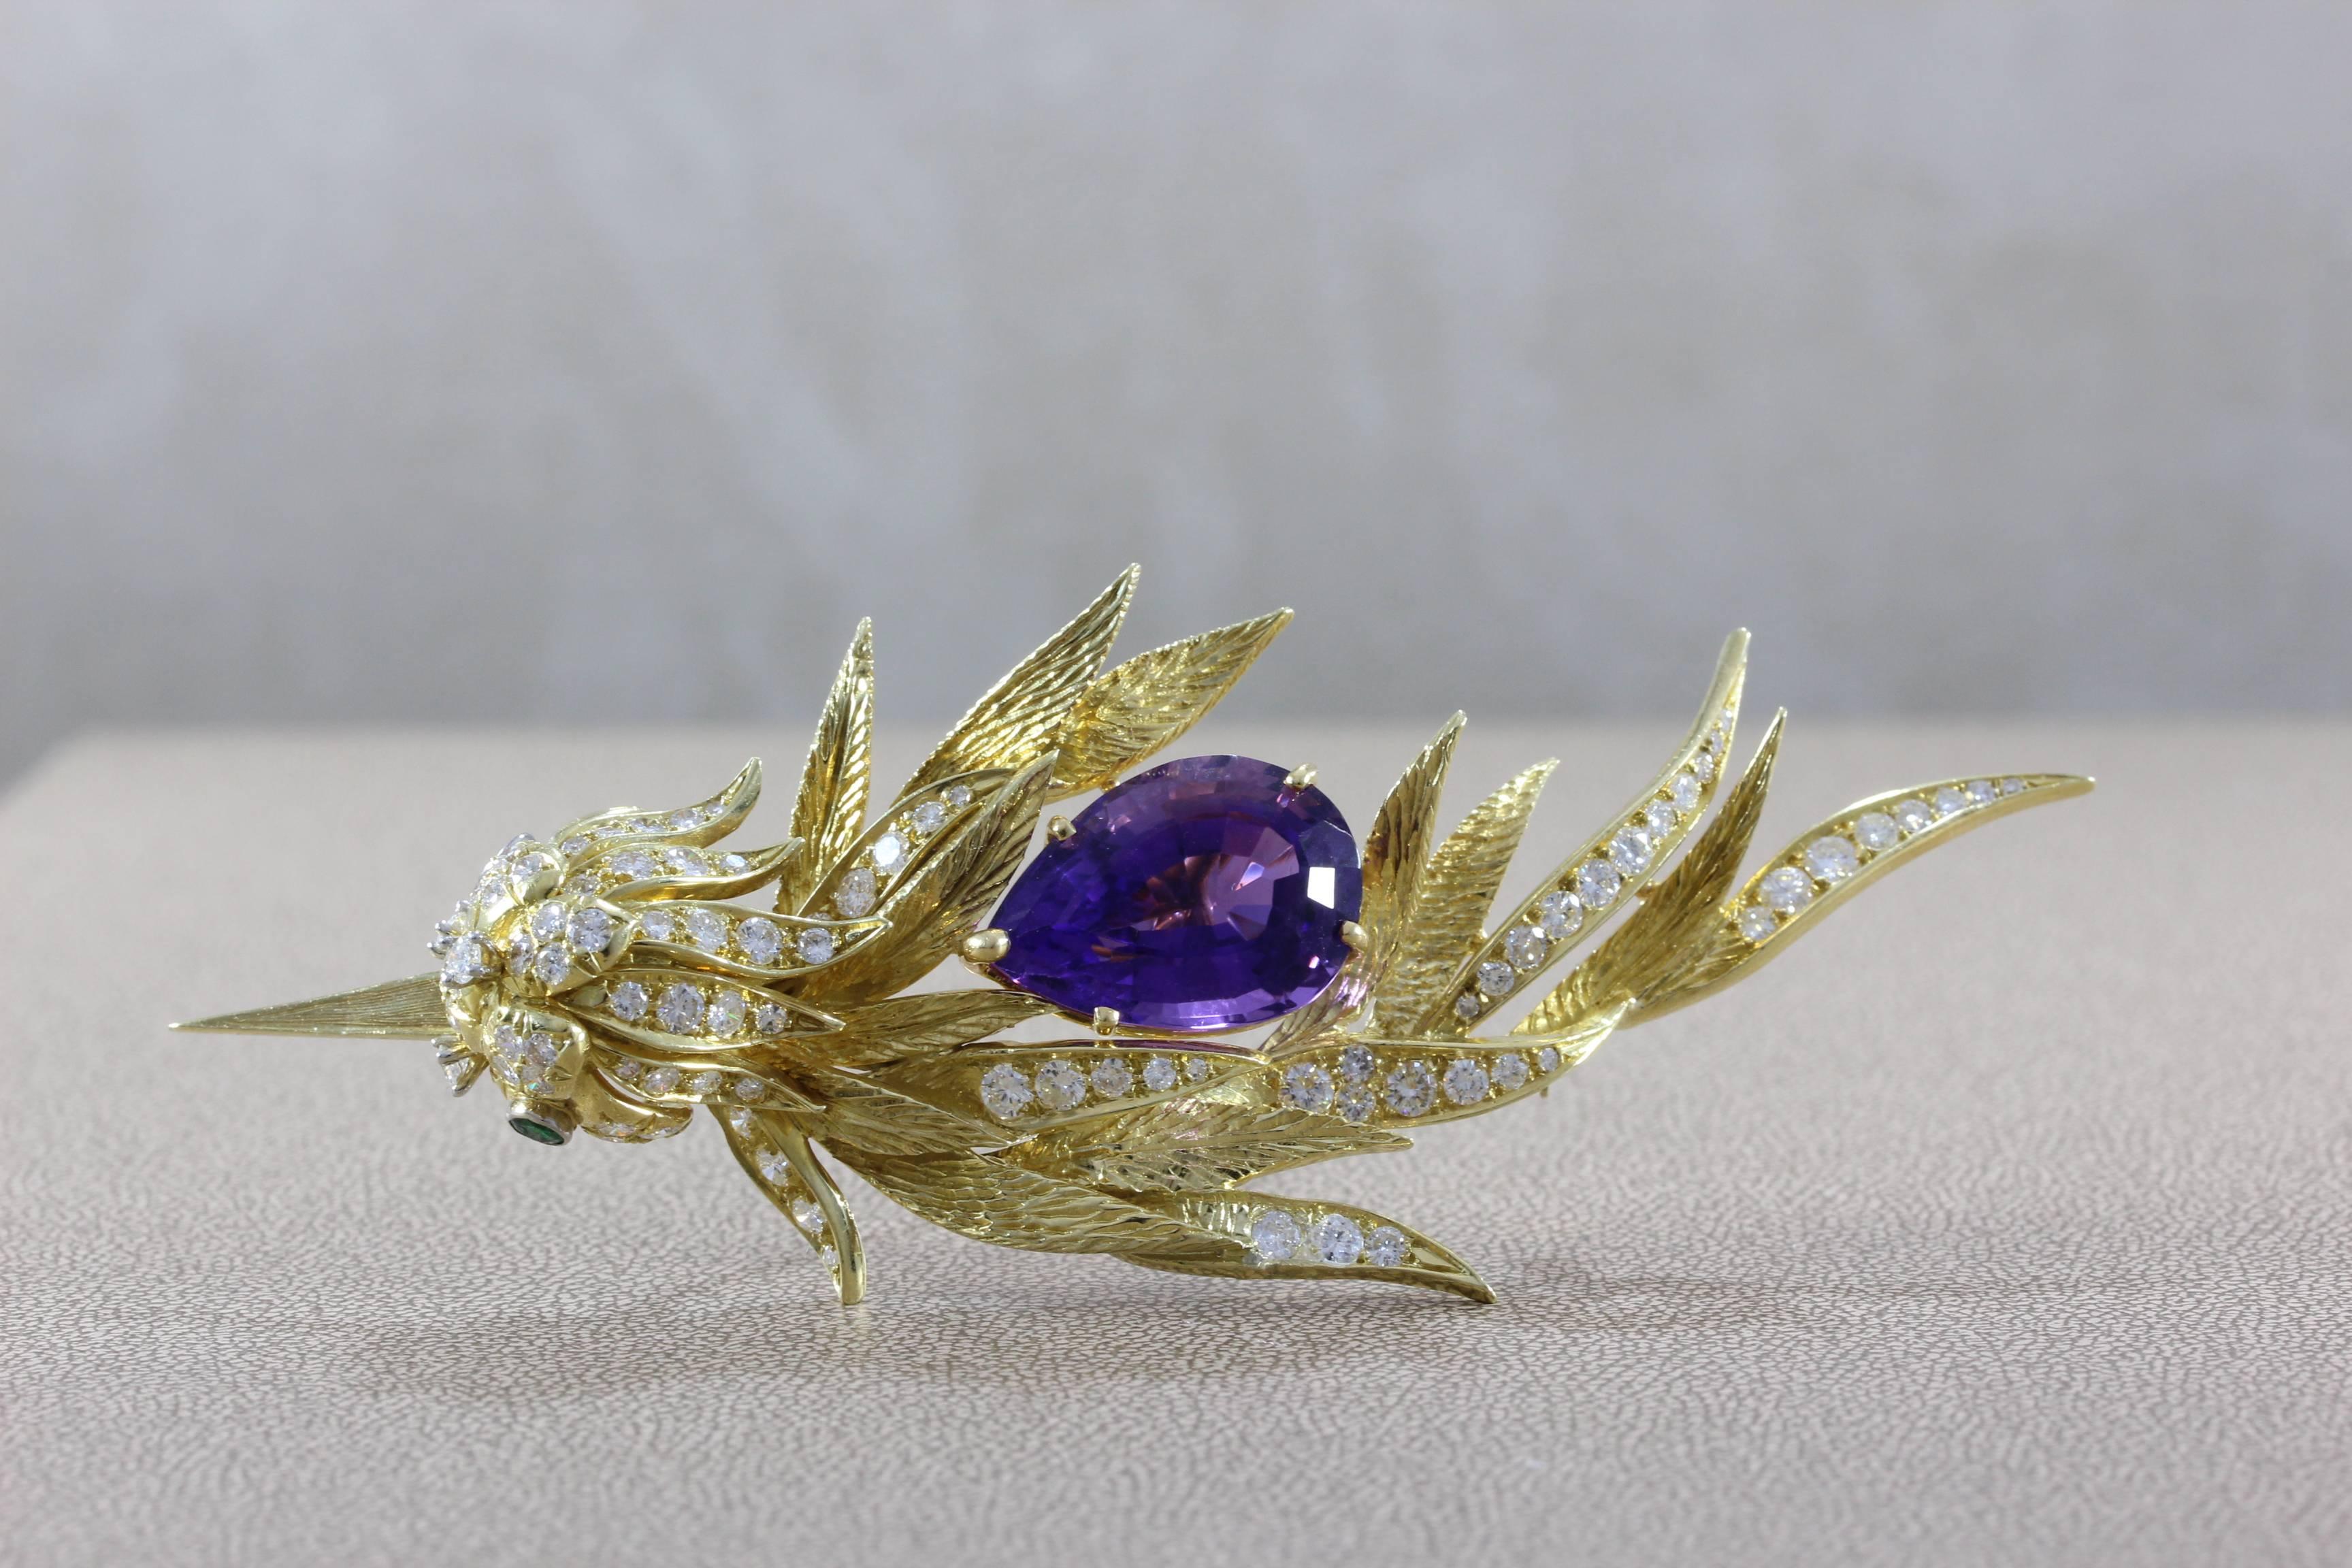 A creative work of art, this brooch features a 17.90 pear shape purple amethyst. Accenting the amethyst and creating flair to the piece are 4.07 carats of diamonds set in 18K yellow gold on the feathers and head of the lovely bird. Two emeralds act